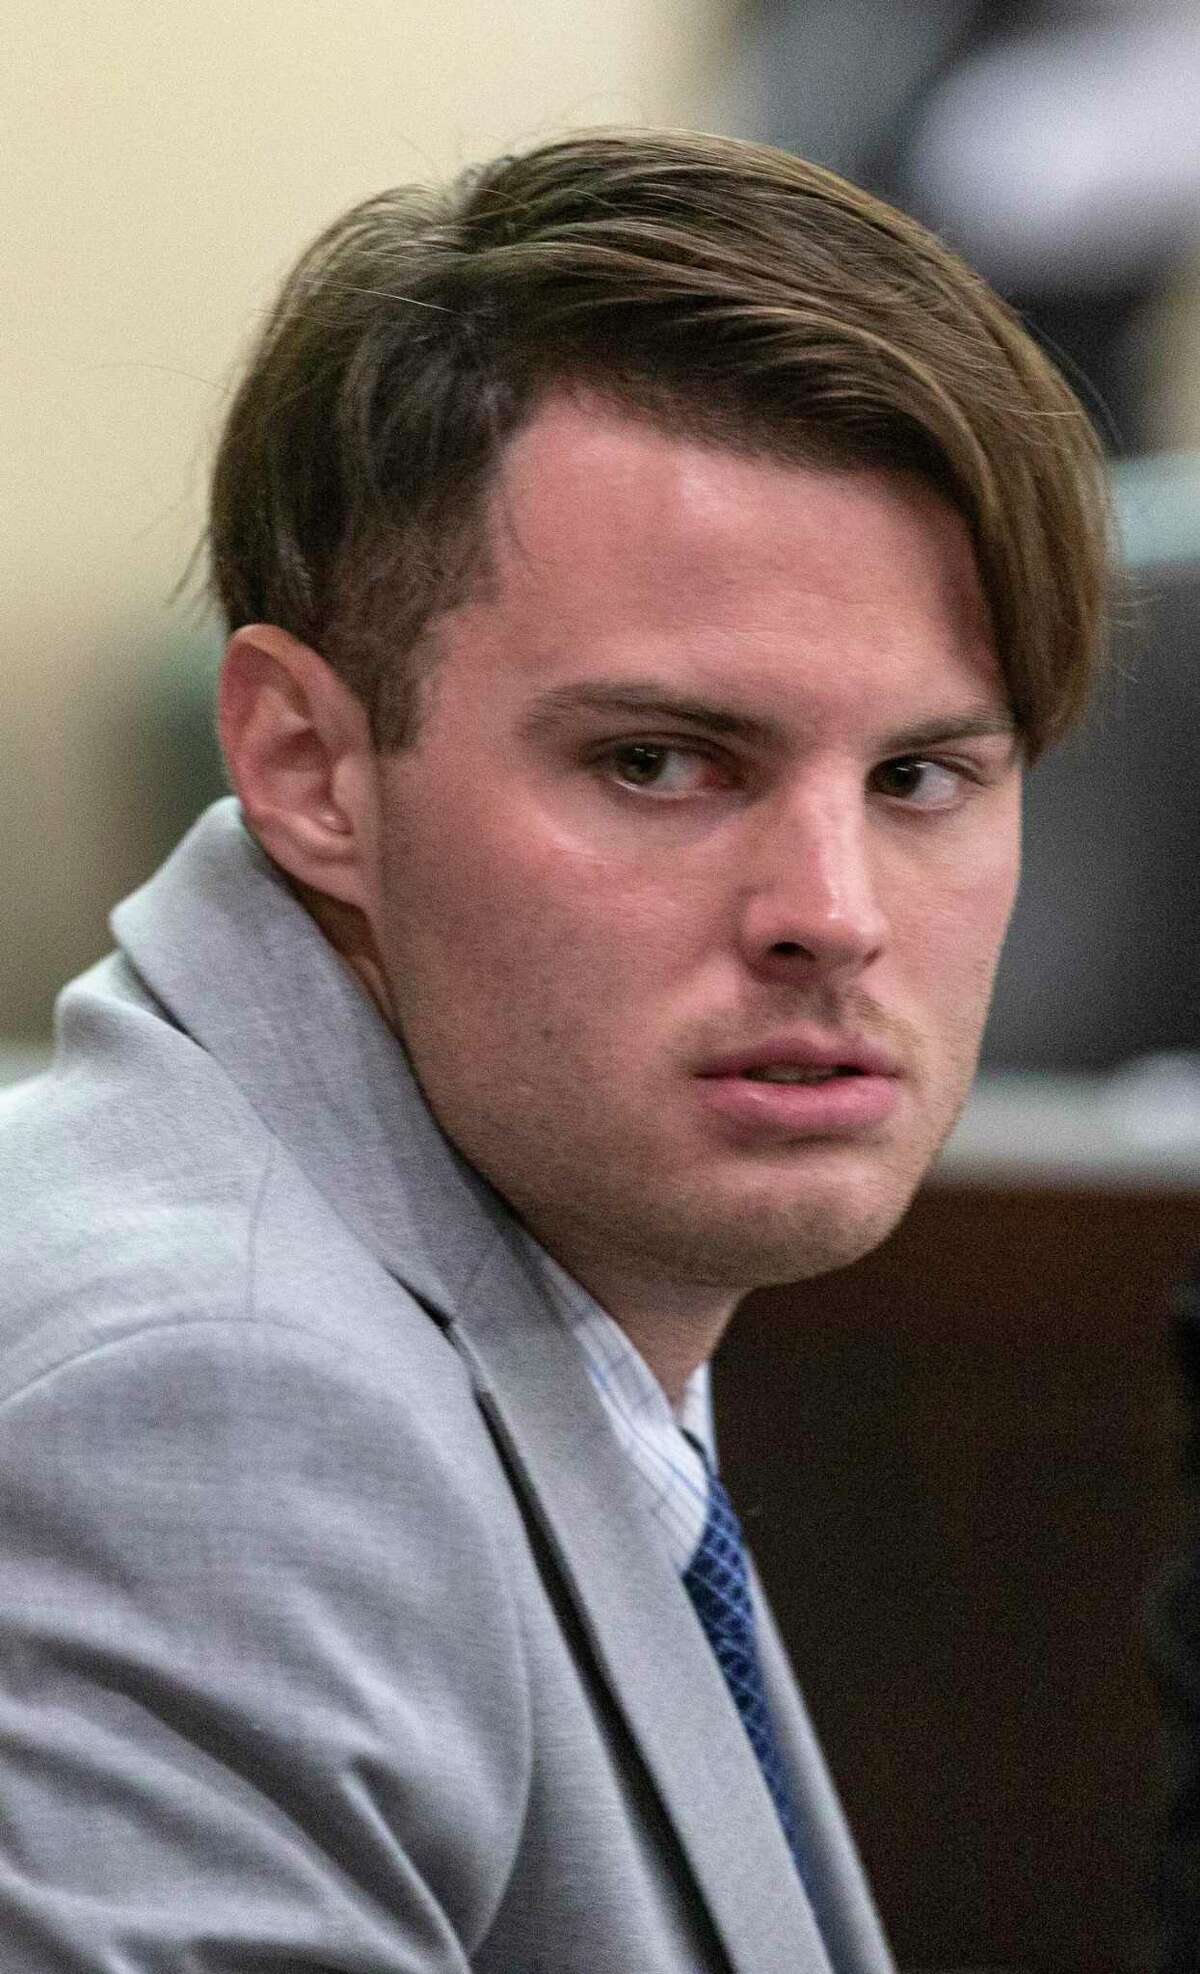 Mark Howerton looks Wednesday, Dec. 4, 2019 around the 144th state District Court in the Cadena-Reeves Criminal Justice Center during testimony during his murder trial. Howerton is alleged to have beaten Cayley Mandadi, a 19-year-old Trinity University cheerleader, to death in 2017.